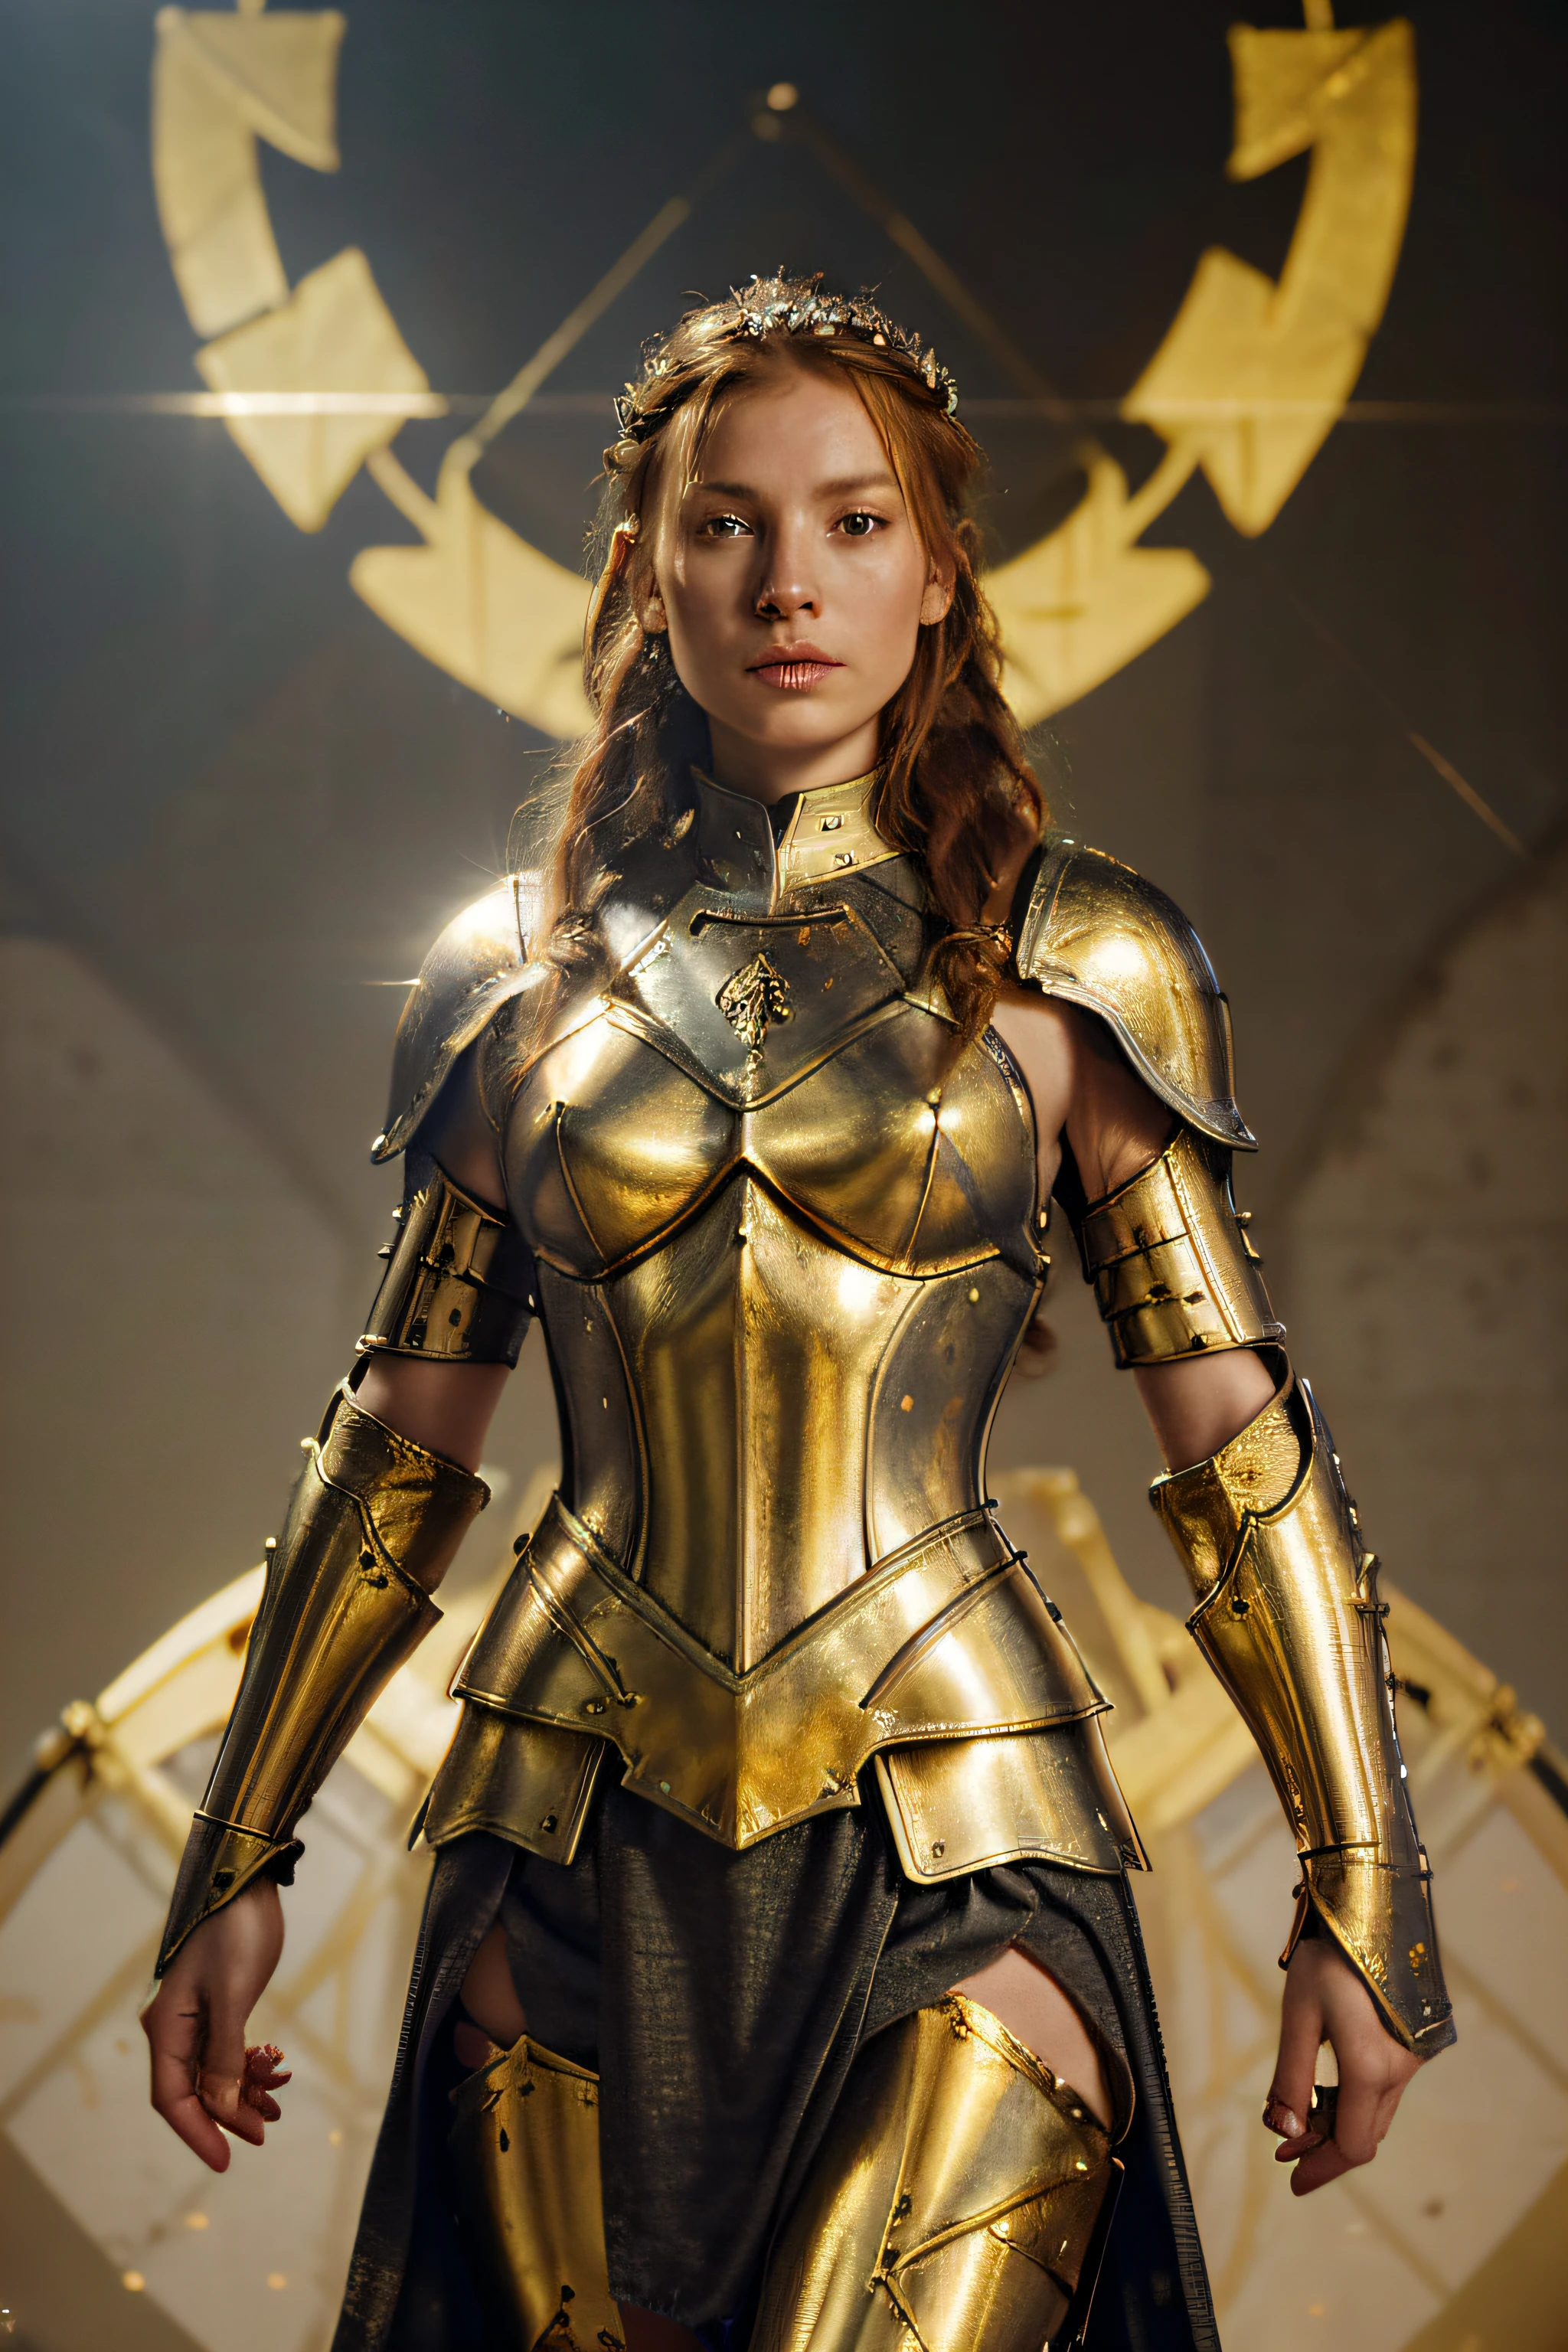 raw, skinny athletic northern European (full knight armor), (golden nimbus around head), (golden tiara), halo of golden light around head, red hair, full body shot, fighting posture, Dutch braided hair, perfect face, very pale skin, freckles, masterpiece, best quality, 4K